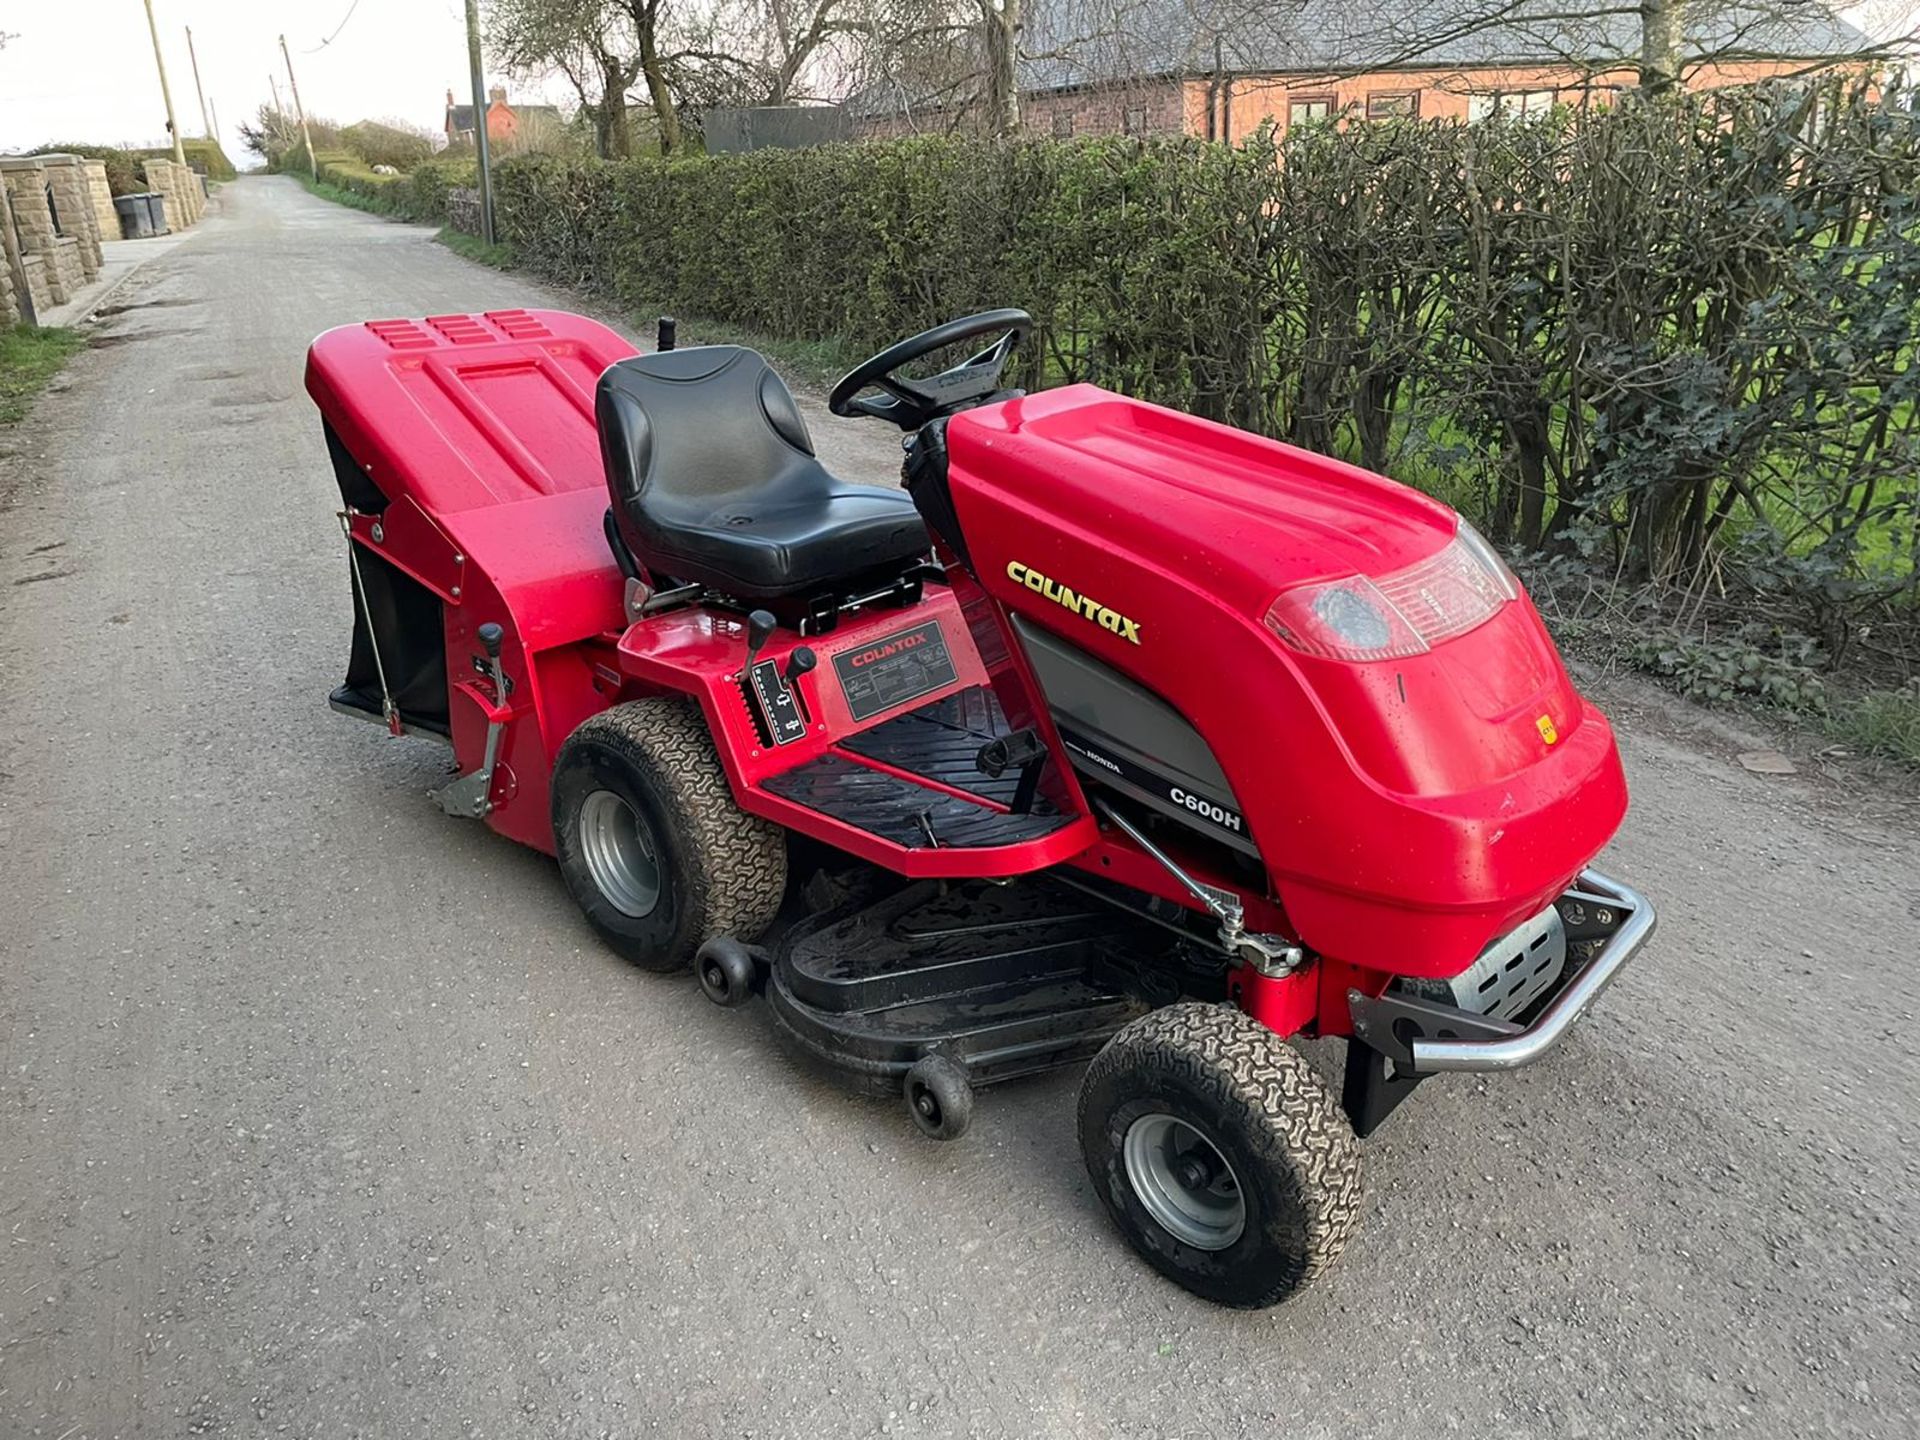 COUNTAX C600H RIDE ON MOWER WITH SCARIFIER, RUNS DRIVES AND CUTS, SWEEPER WORKS *NO VAT* - Image 3 of 6